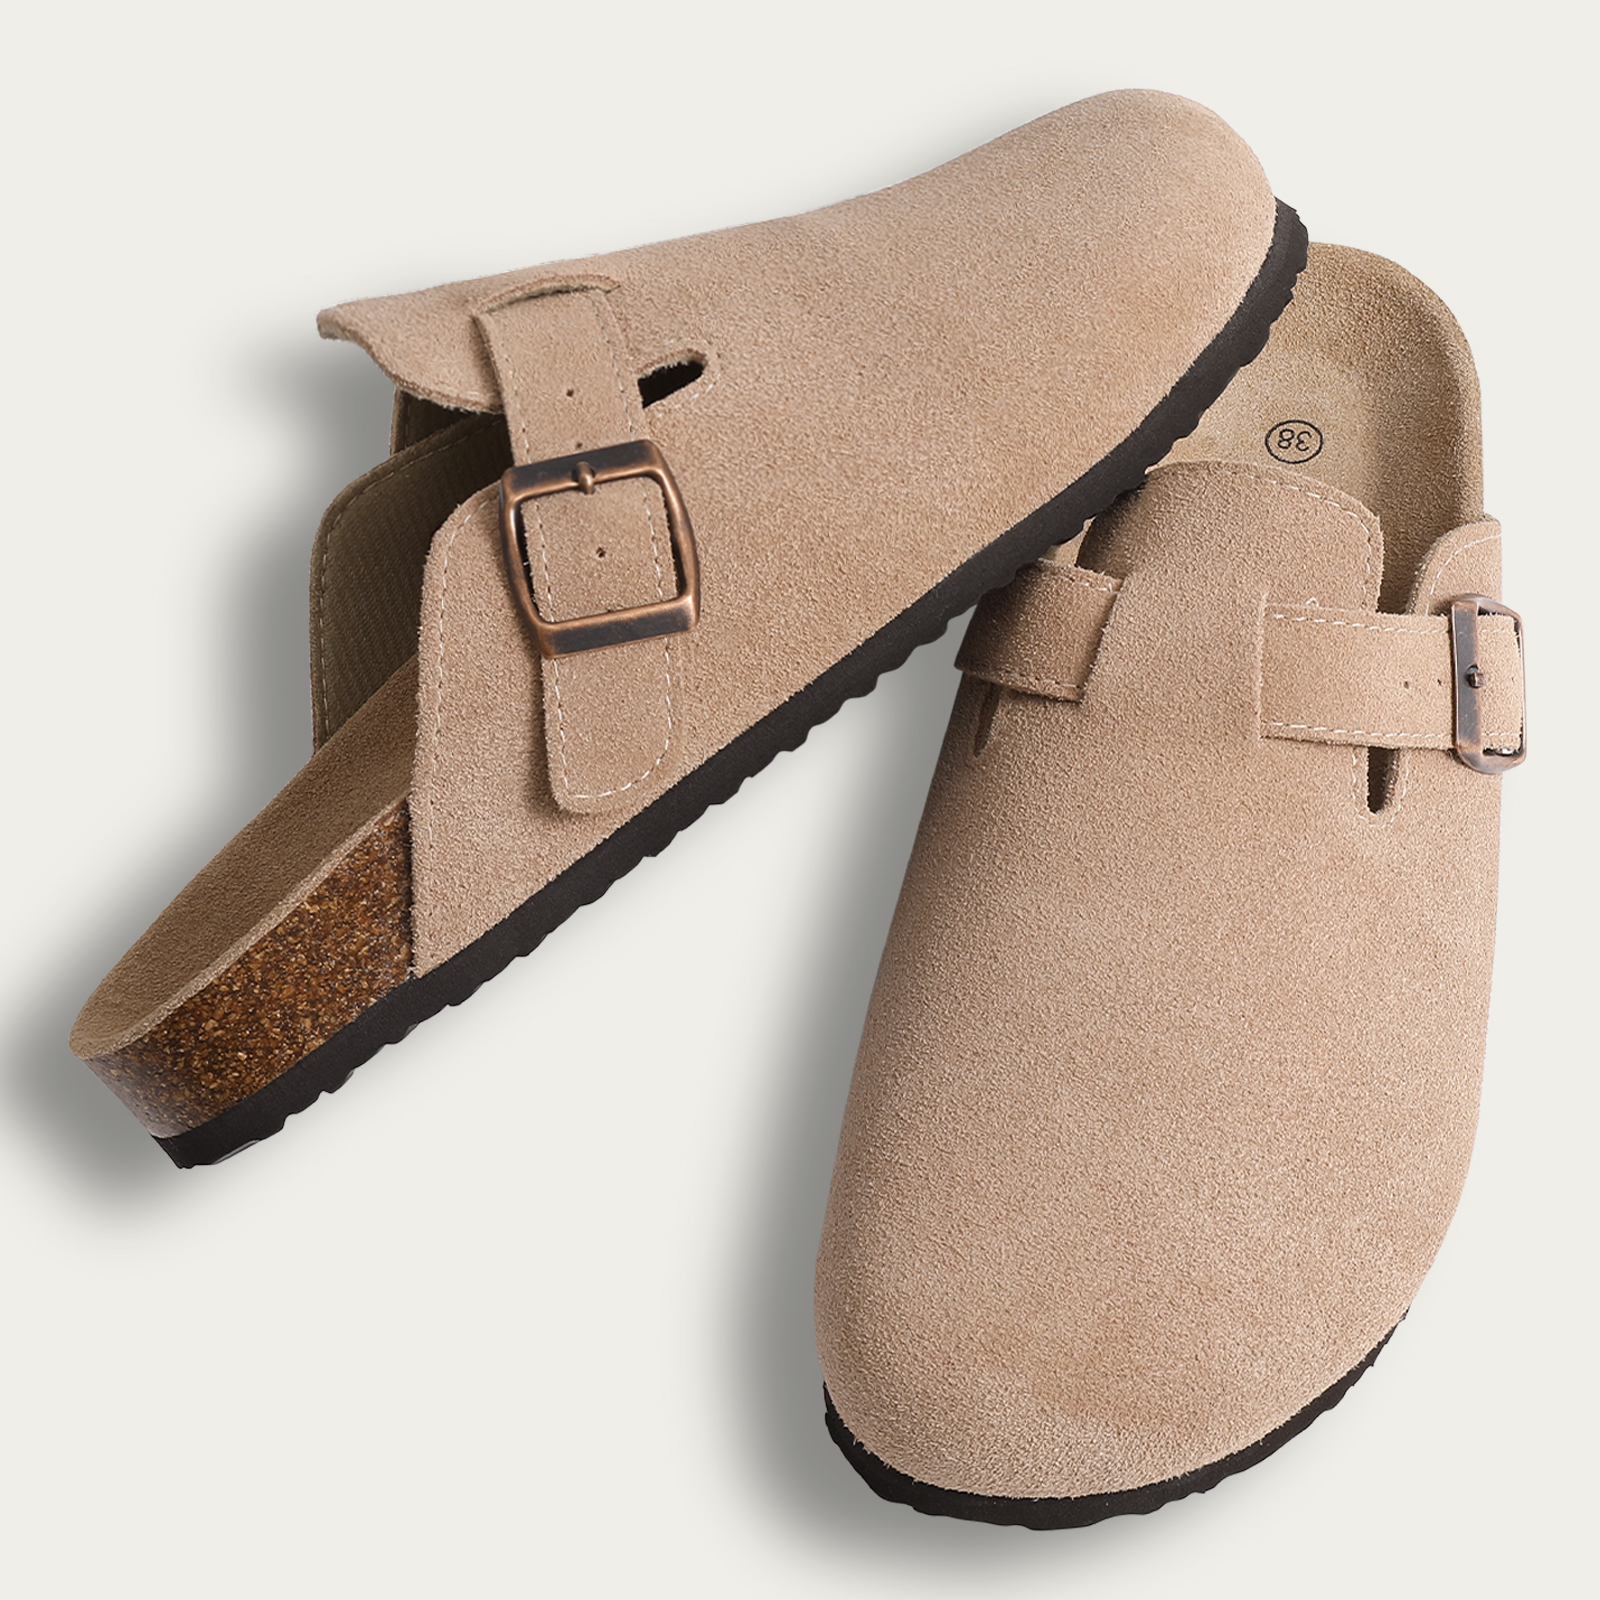 come4buy.com-Cork Insole Sandals With Arch Support Outdoor Lovers Beach Sandals